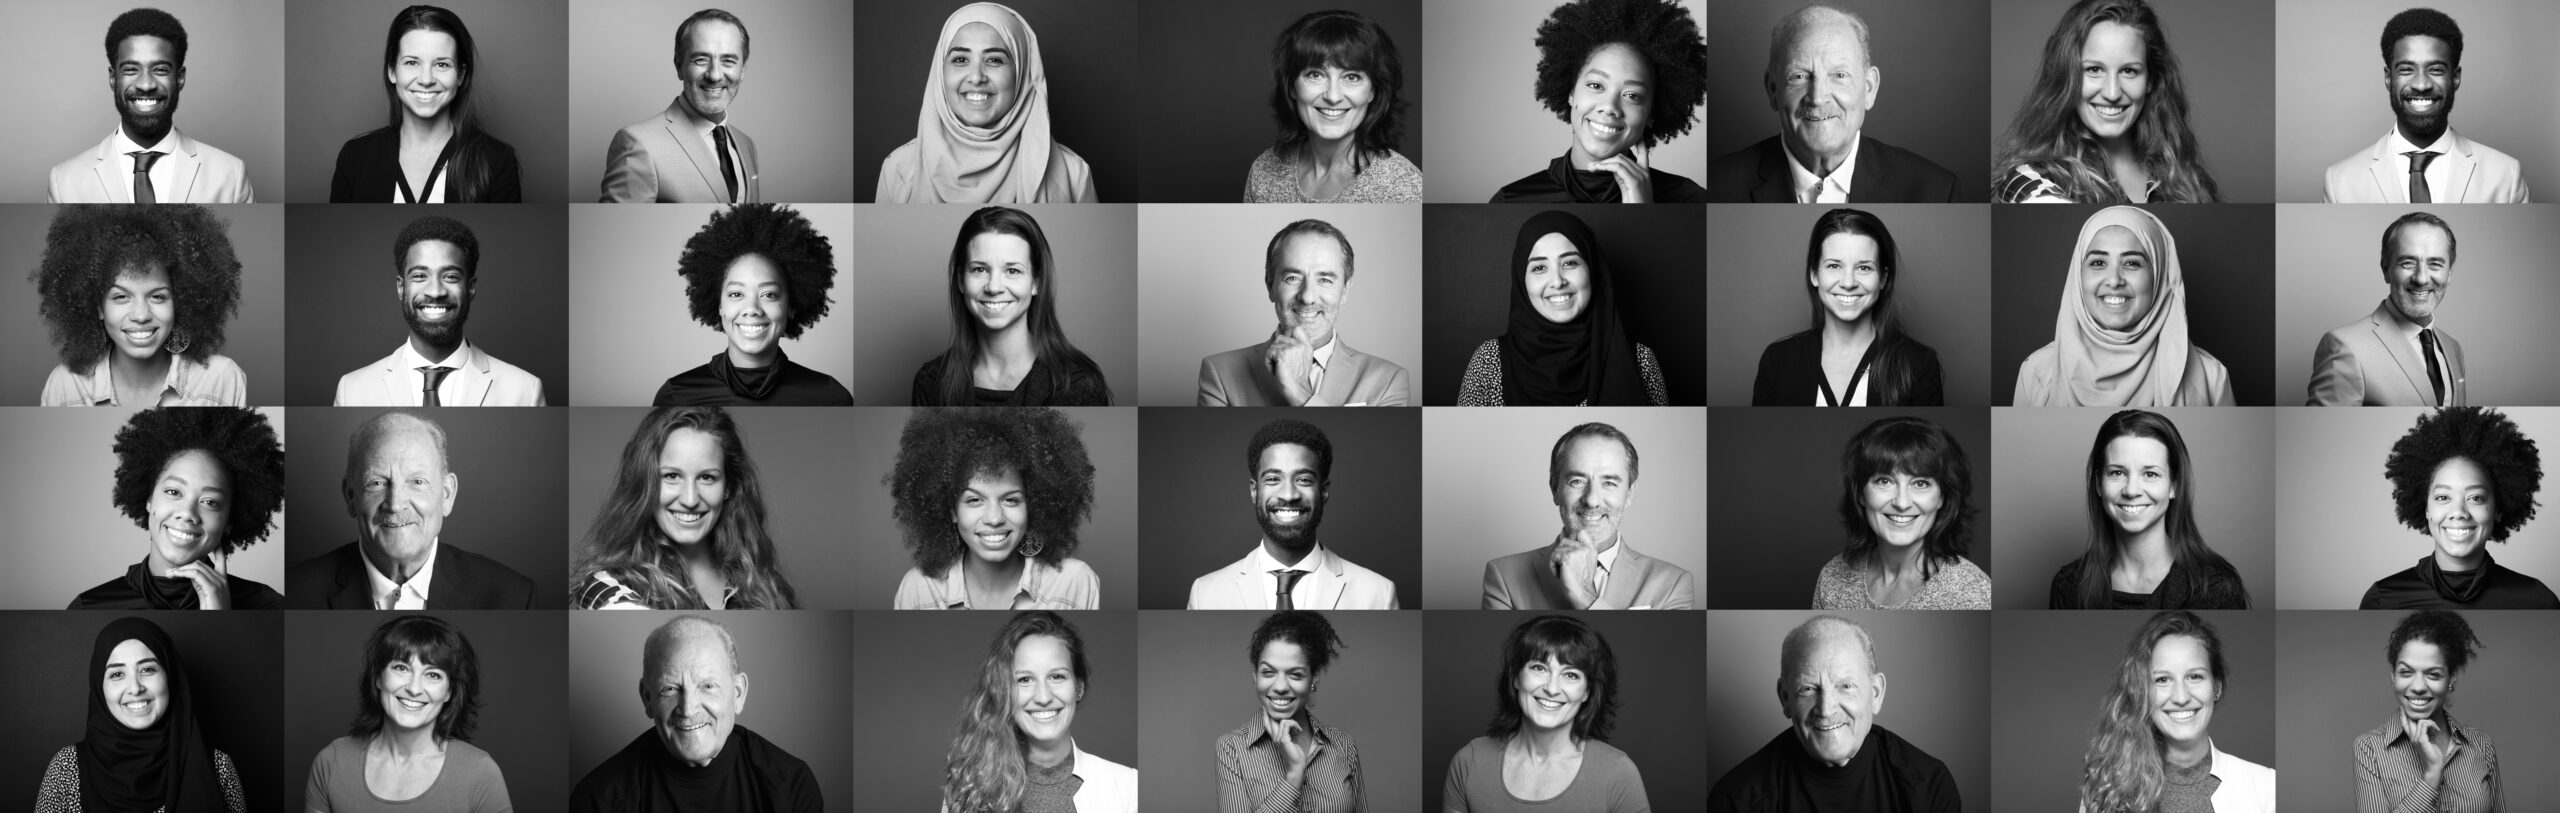 Black and white photo collage of people of different genders and races